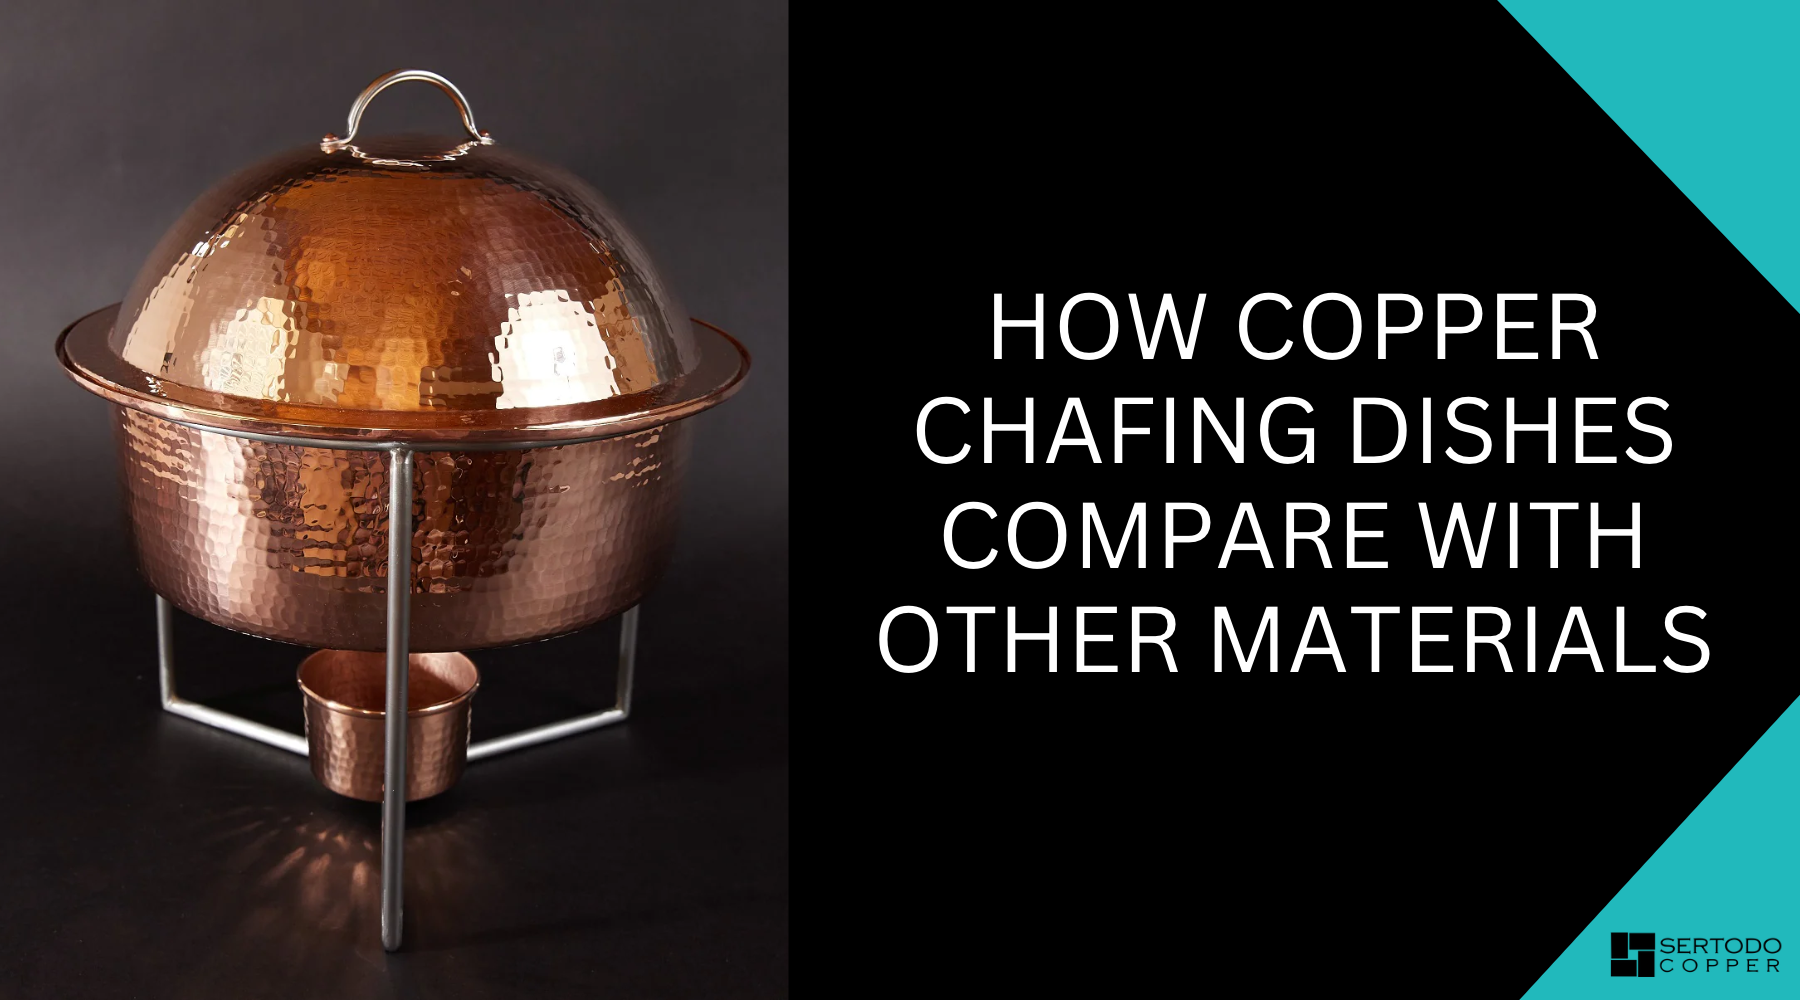 Copper chafing dishes compared to other materials